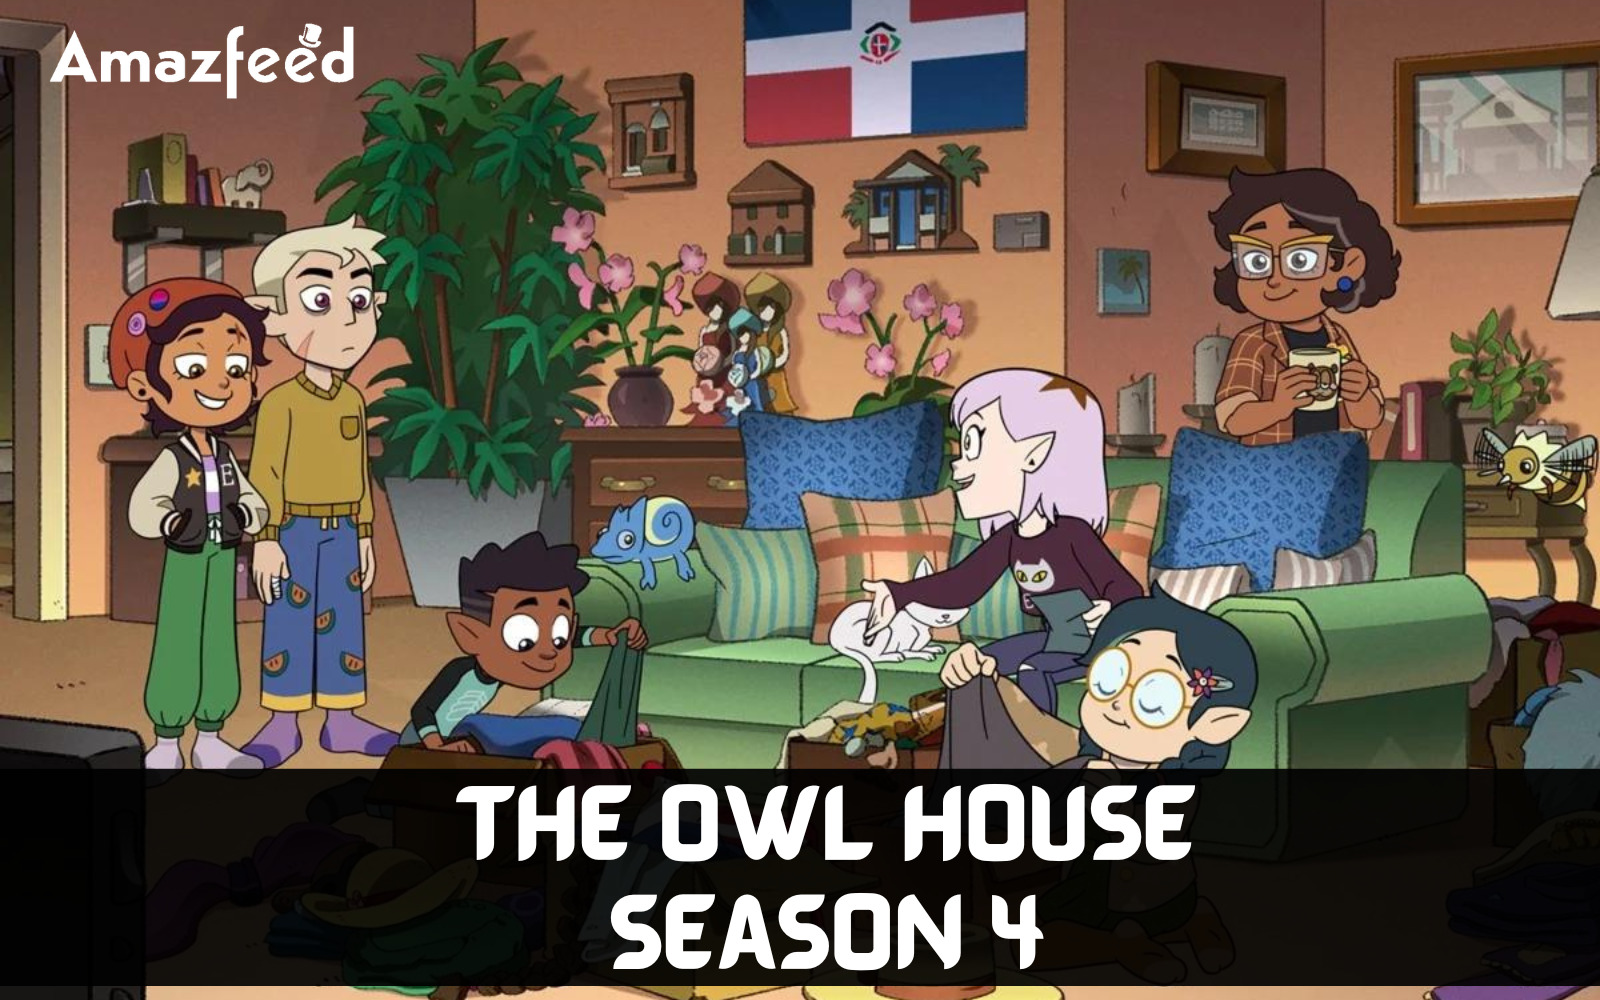 Is The Owl House Season 4 Renewed Or Cancelled